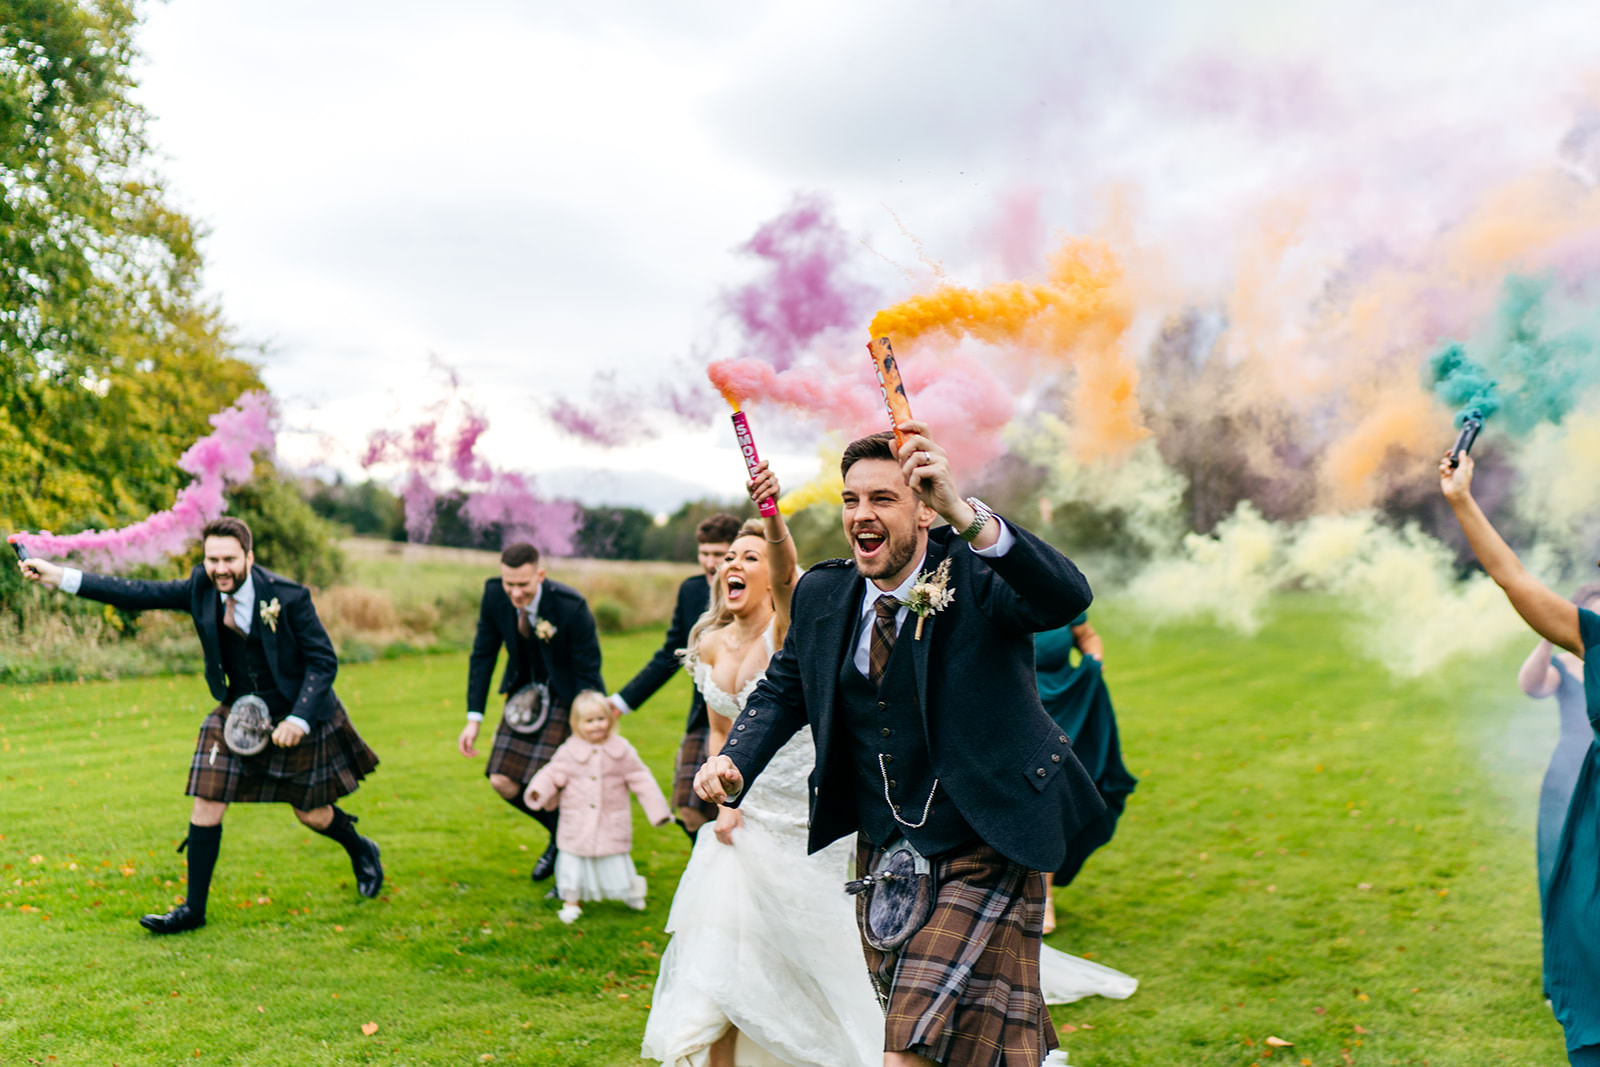 Smoke bombs group shots with whole bridal party